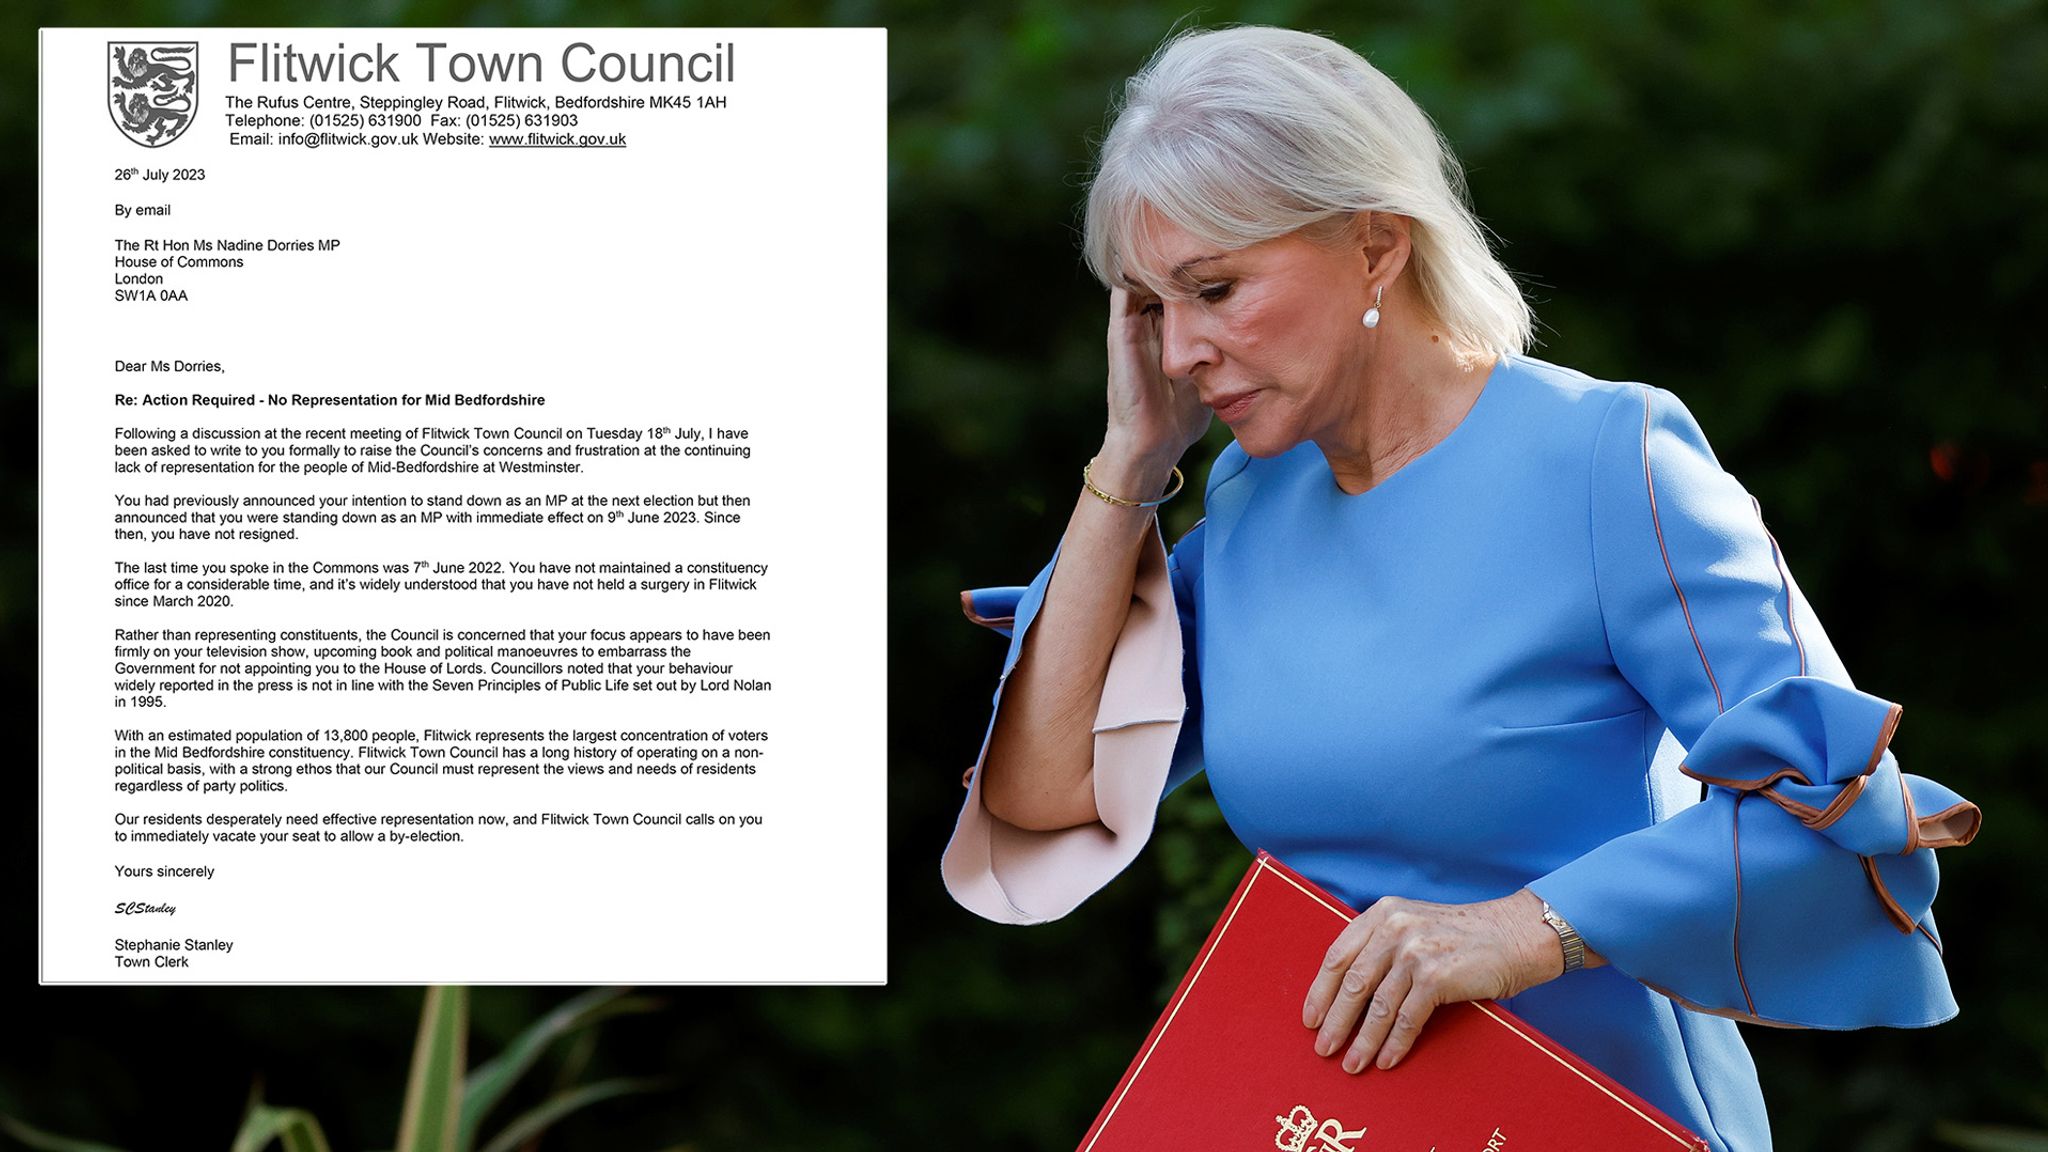 Council demands Nadine Dorries resigns 'immediately' as constituents 'desperately need effective representation'